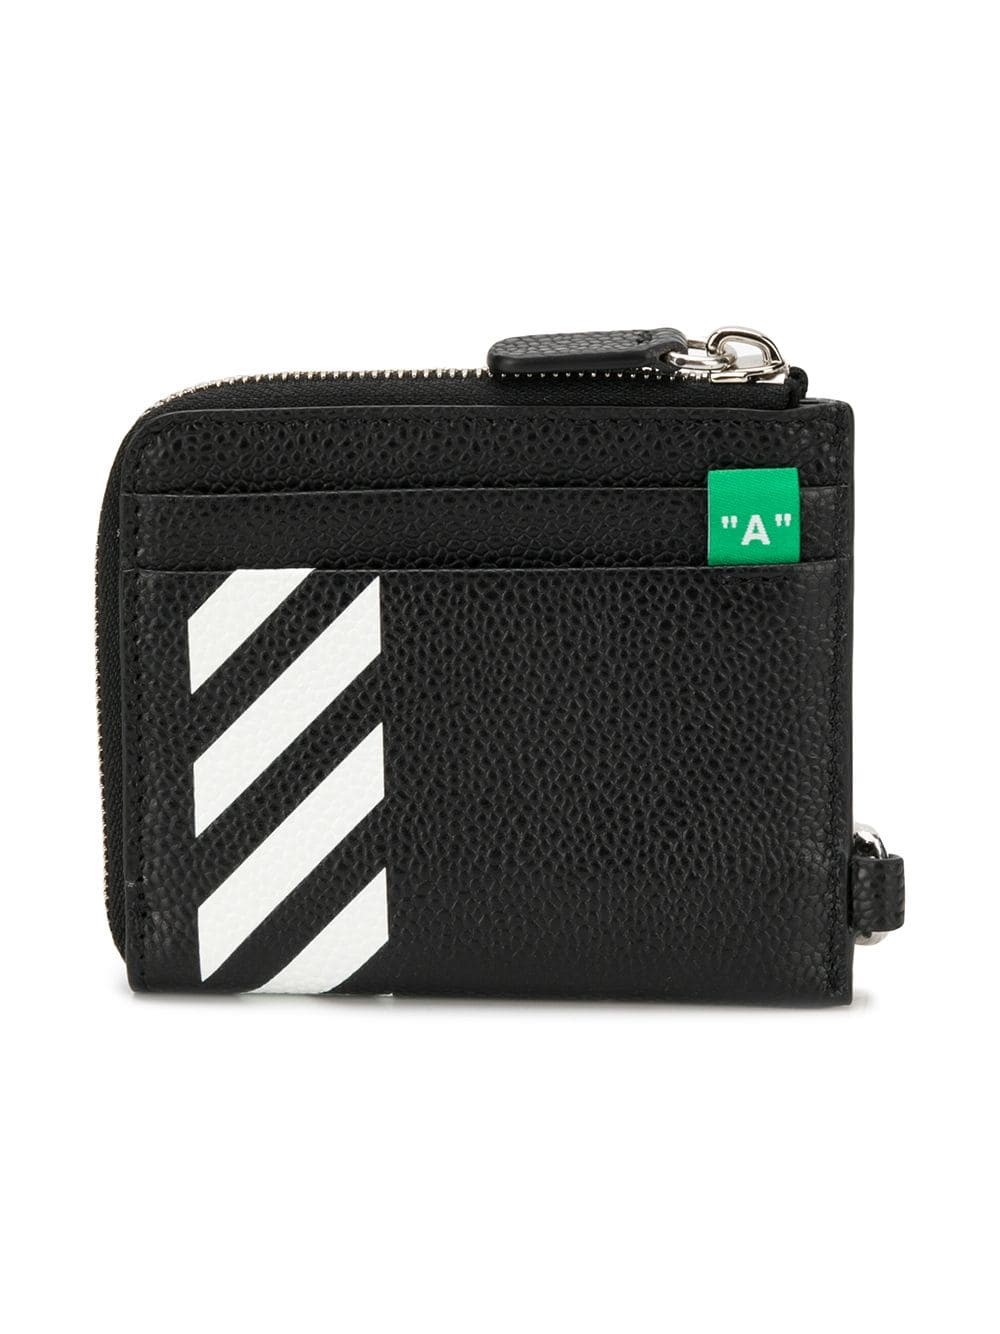 off-white DIAG WALLET available on montiboutique.com - 26001